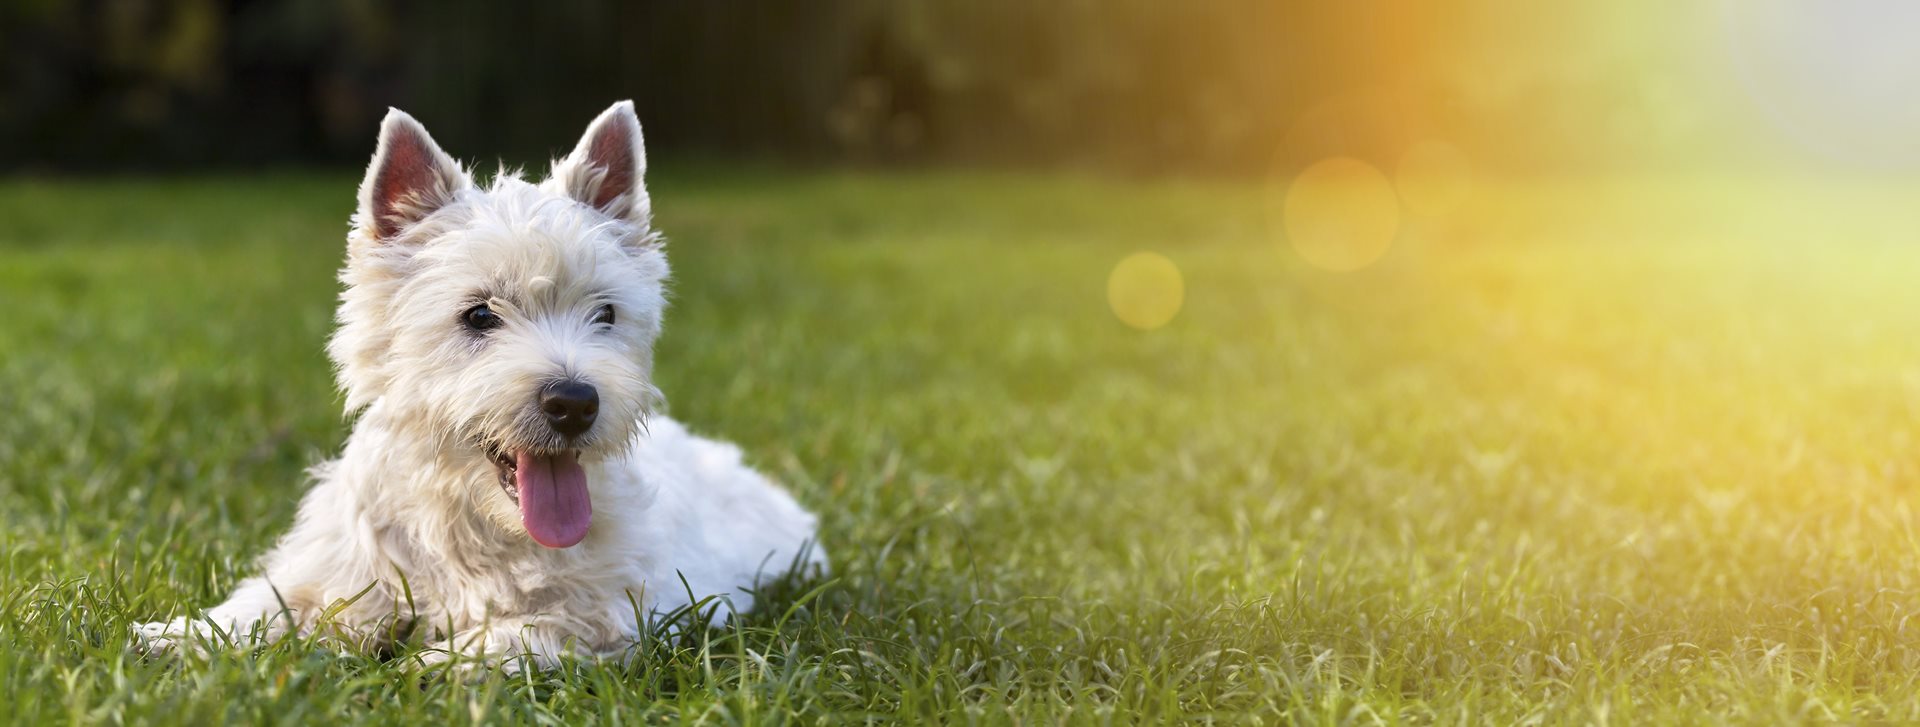 Small white dog lying in the grass.